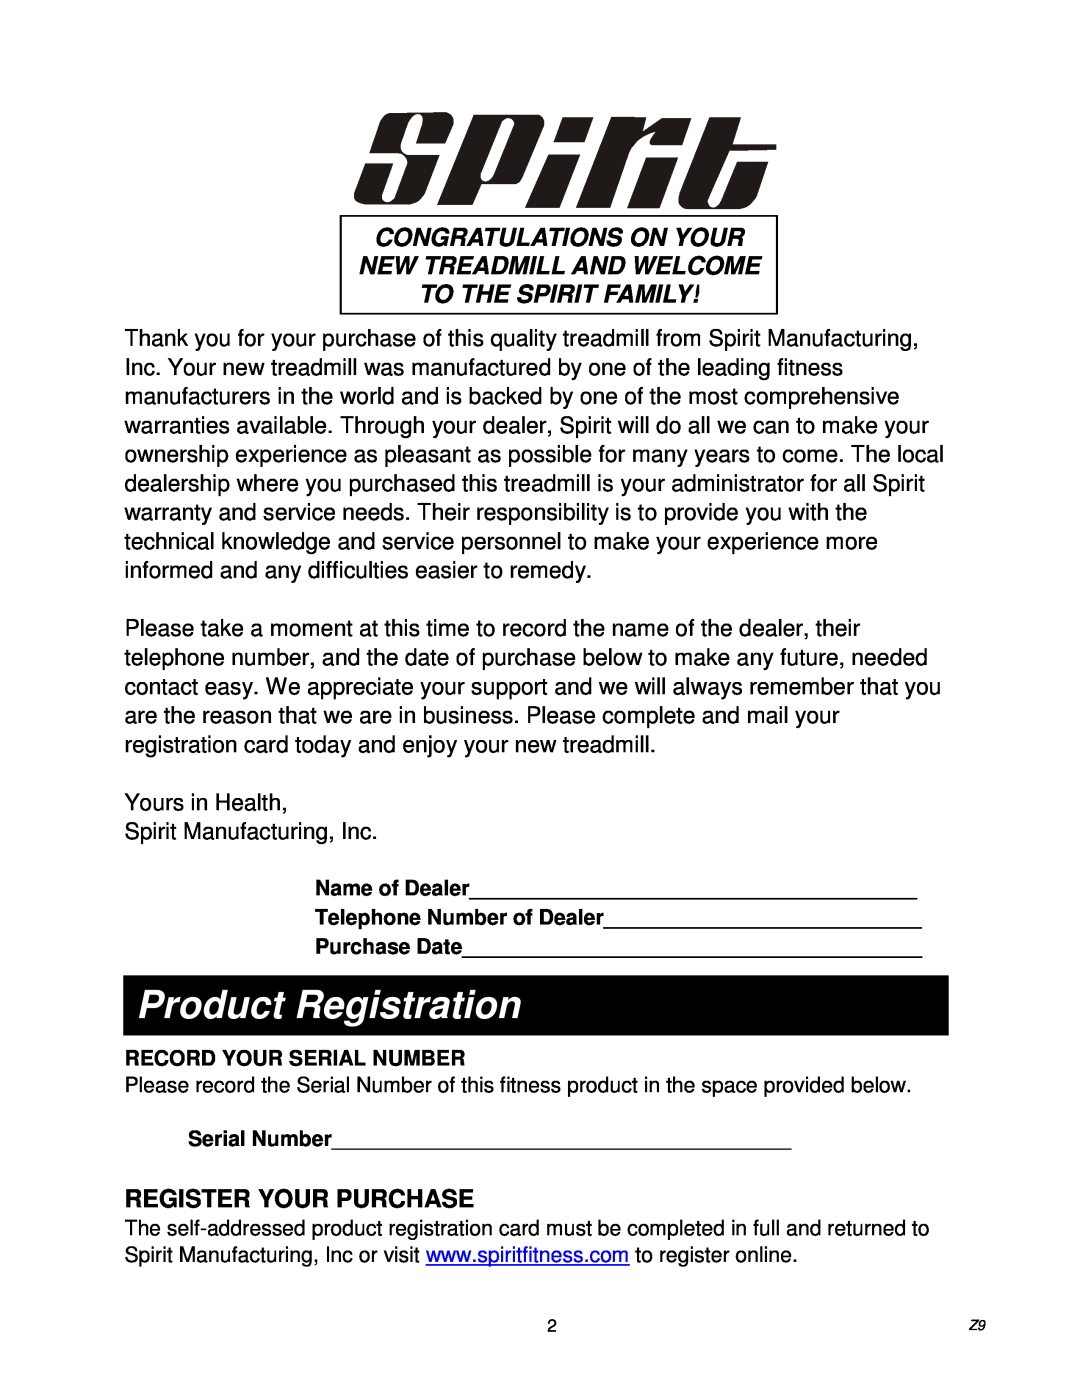 Spirit Z9 owner manual Product Registration, Register Your Purchase, Congratulations On Your New Treadmill And Welcome 